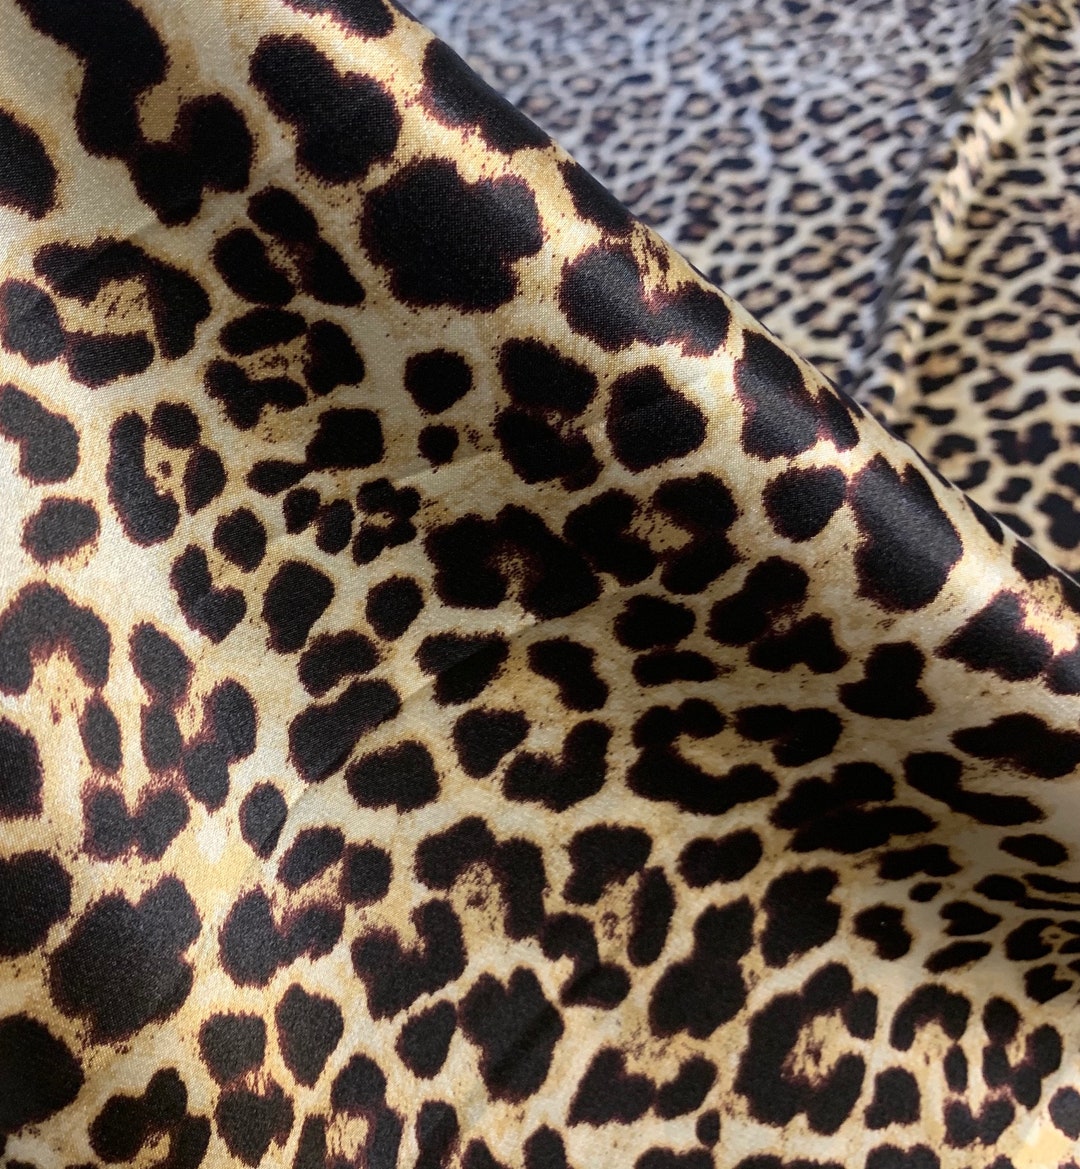 Satin Cheetah Fabric/58 Wide/ Sold by the Yard/special Print - Etsy